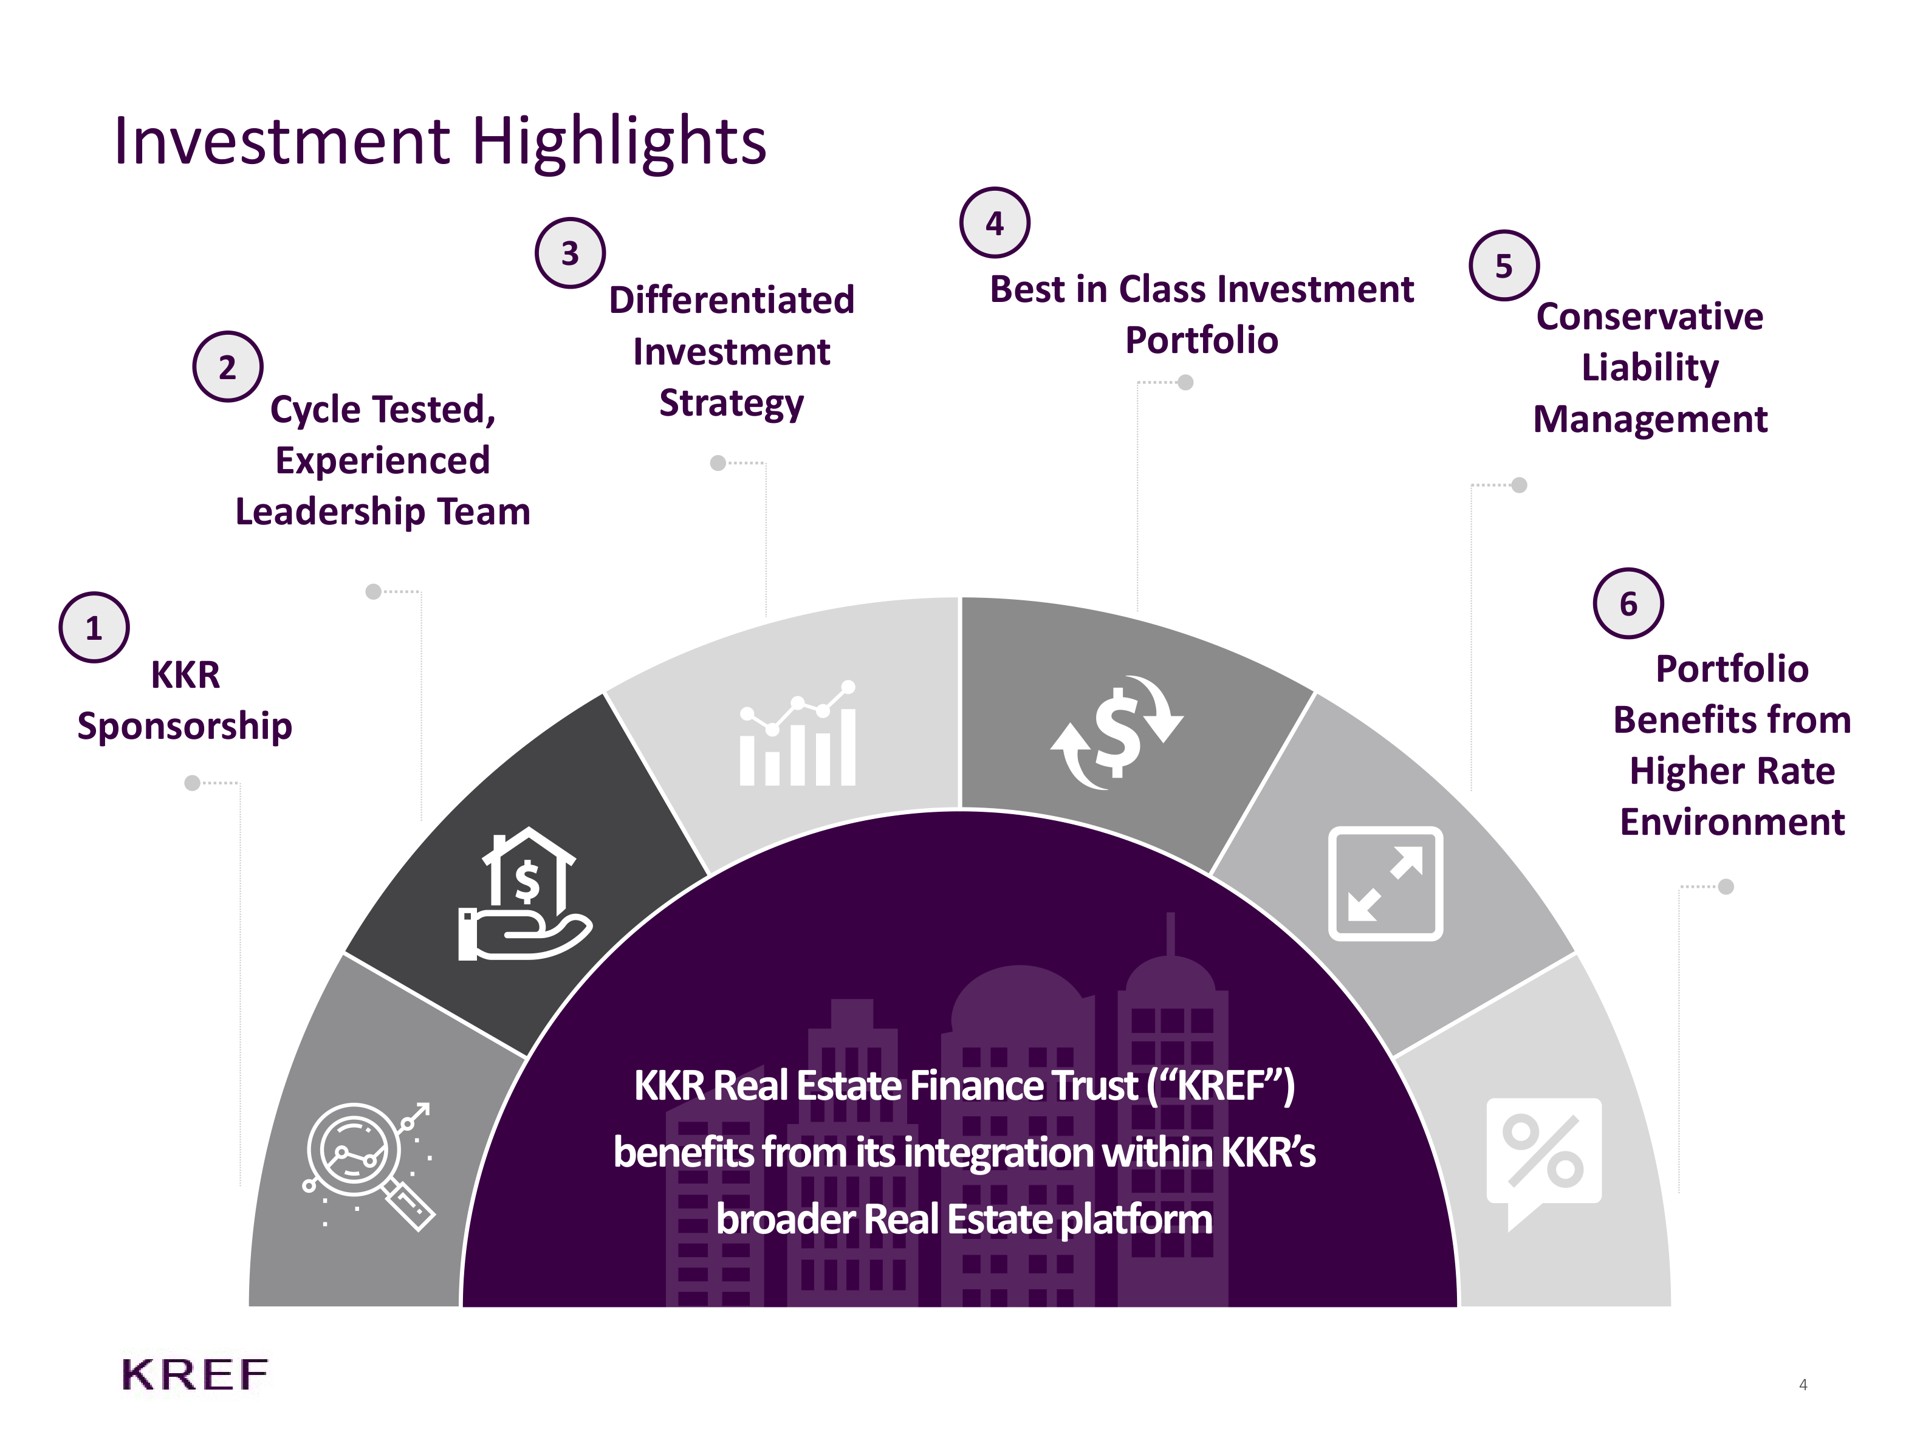 investment highlights cycle tested experienced leadership team sponsorship differentiated investment strategy best in class investment portfolio conservative liability management real estate finance trust benefits from its integration within real estate platform portfolio benefits from higher rate environment dele adda | KKR Real Estate Finance Trust